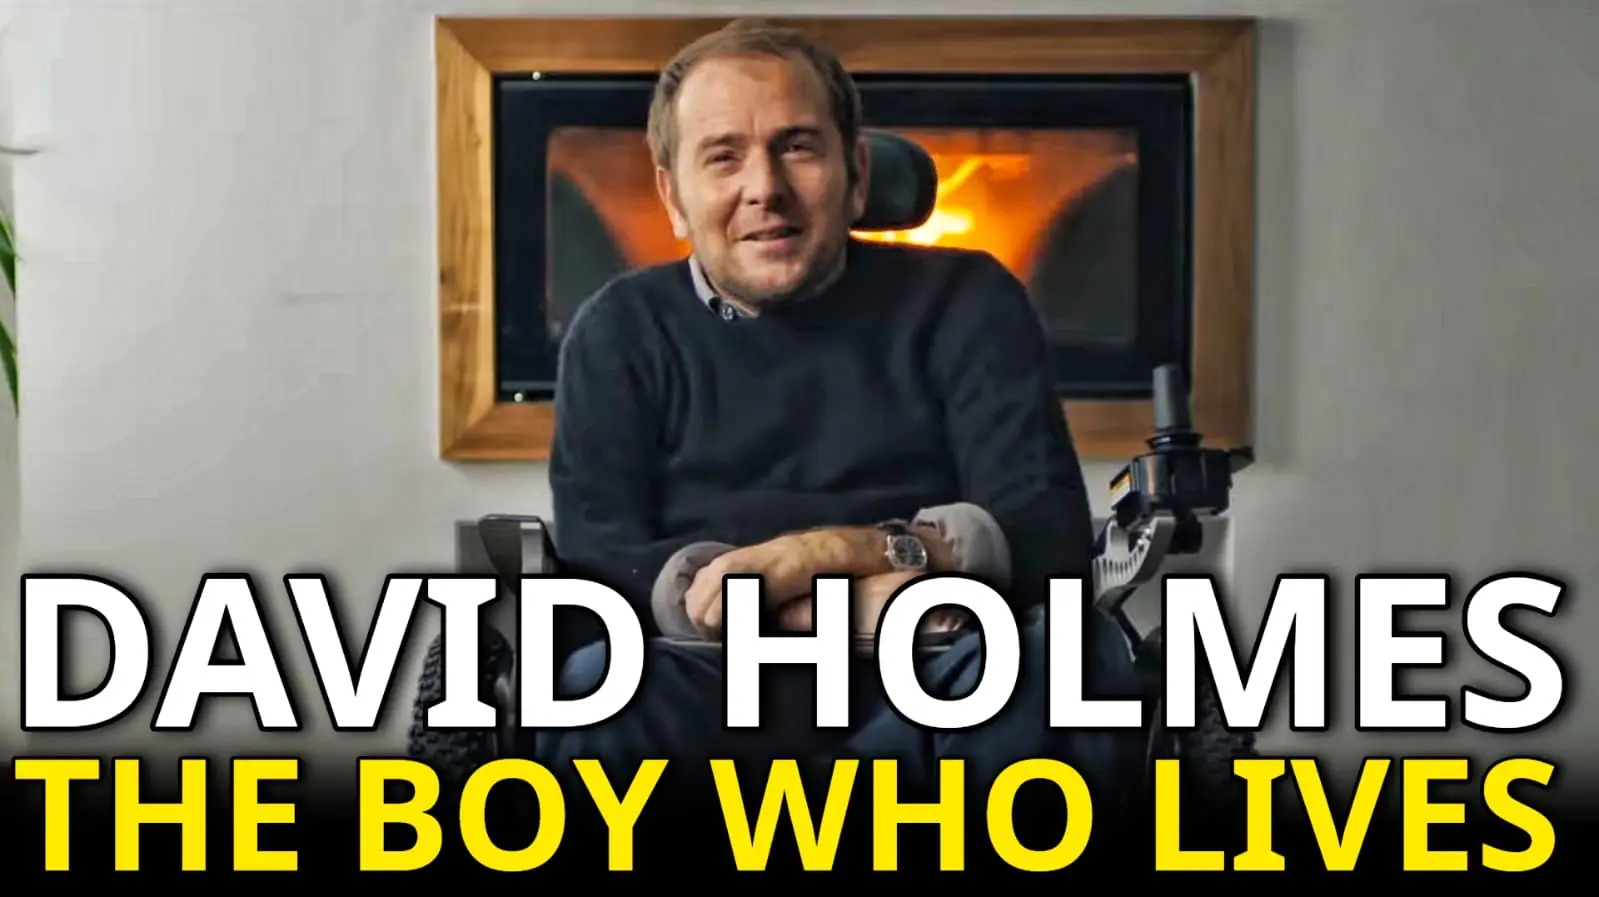 The first trailer for "David Holmes The Boy Who Lived"